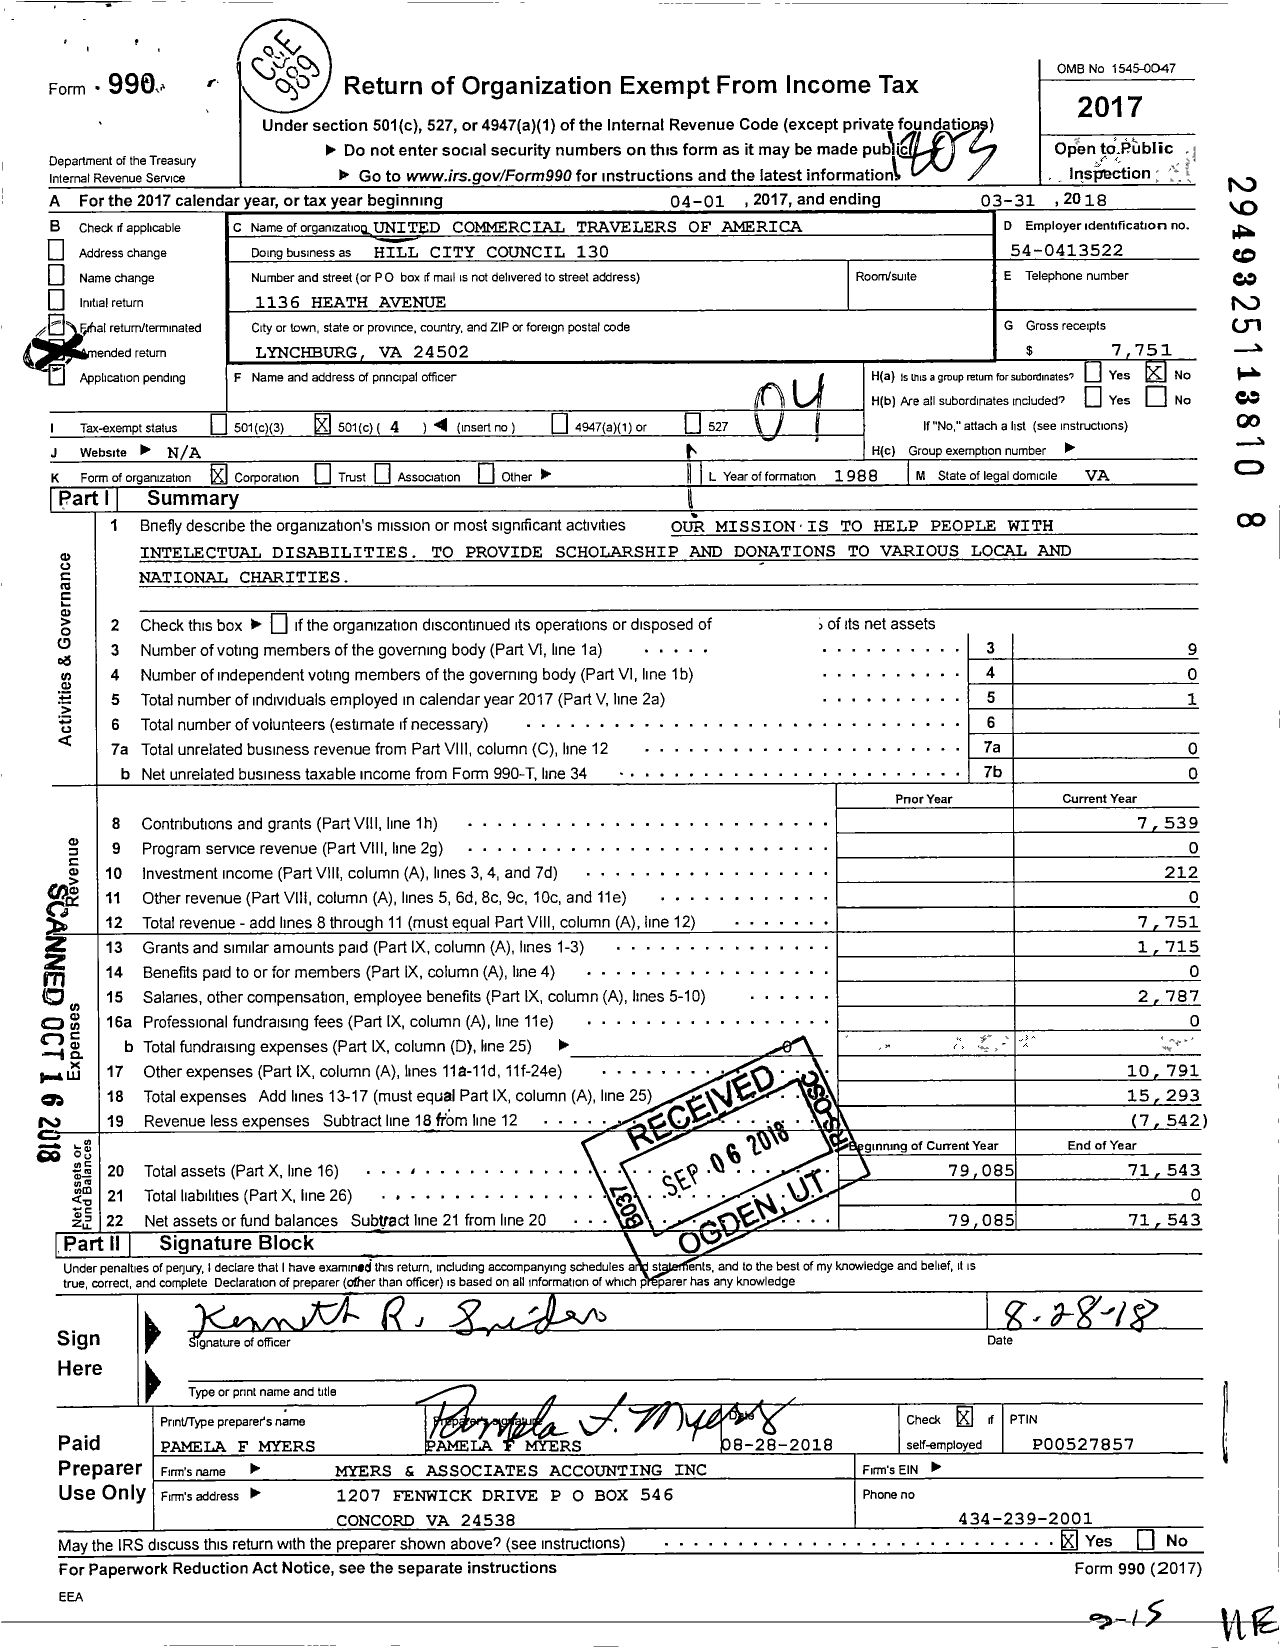 Image of first page of 2017 Form 990O for United Commercial Travelers of America - 130 Hill City Council